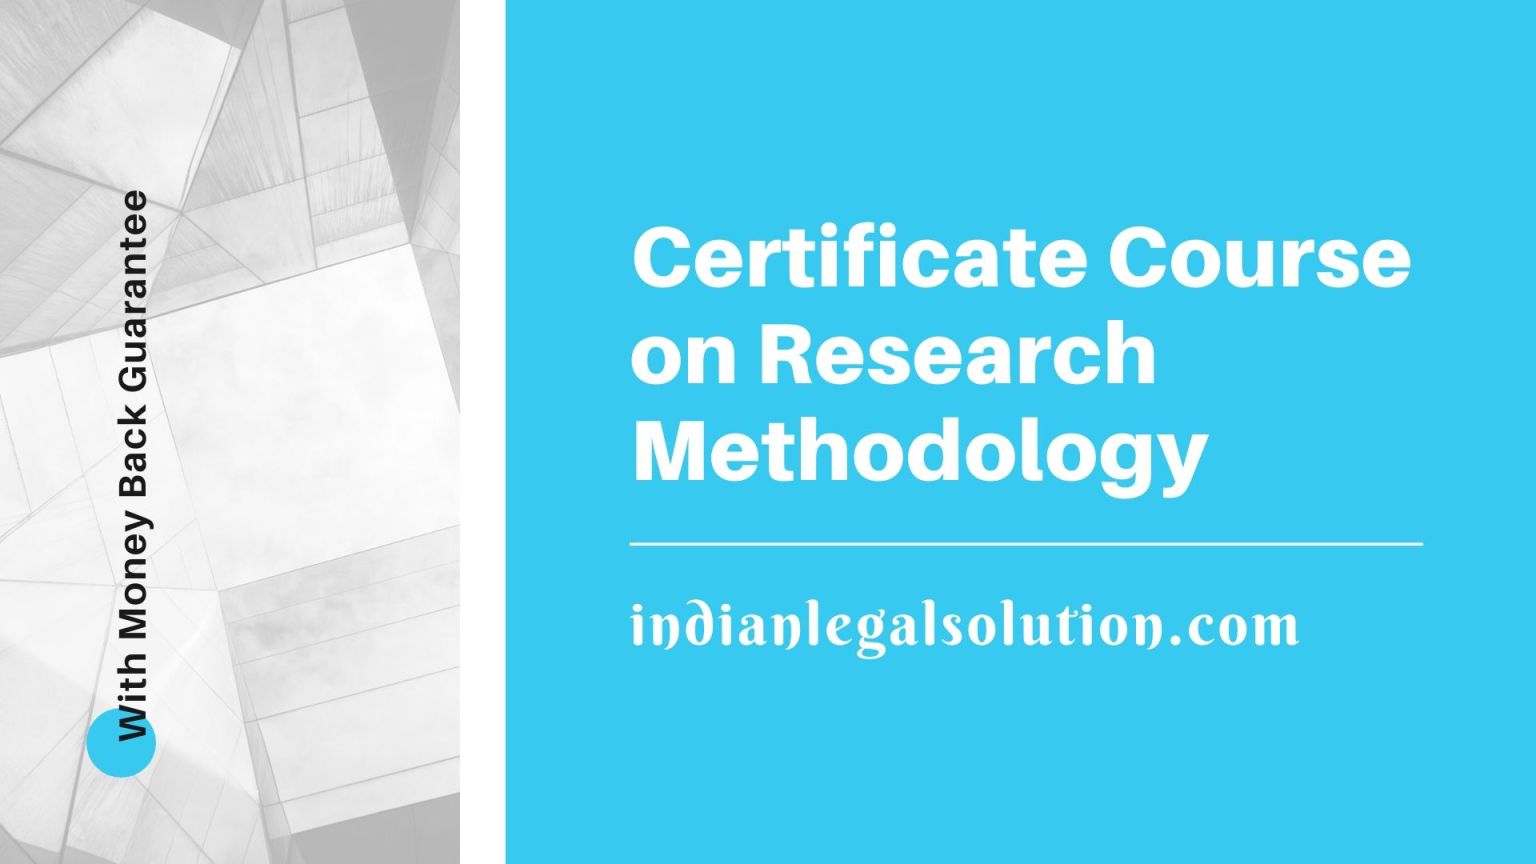 Certificate Course on Research Methodology, 12th batch by indianlegalsolution.com